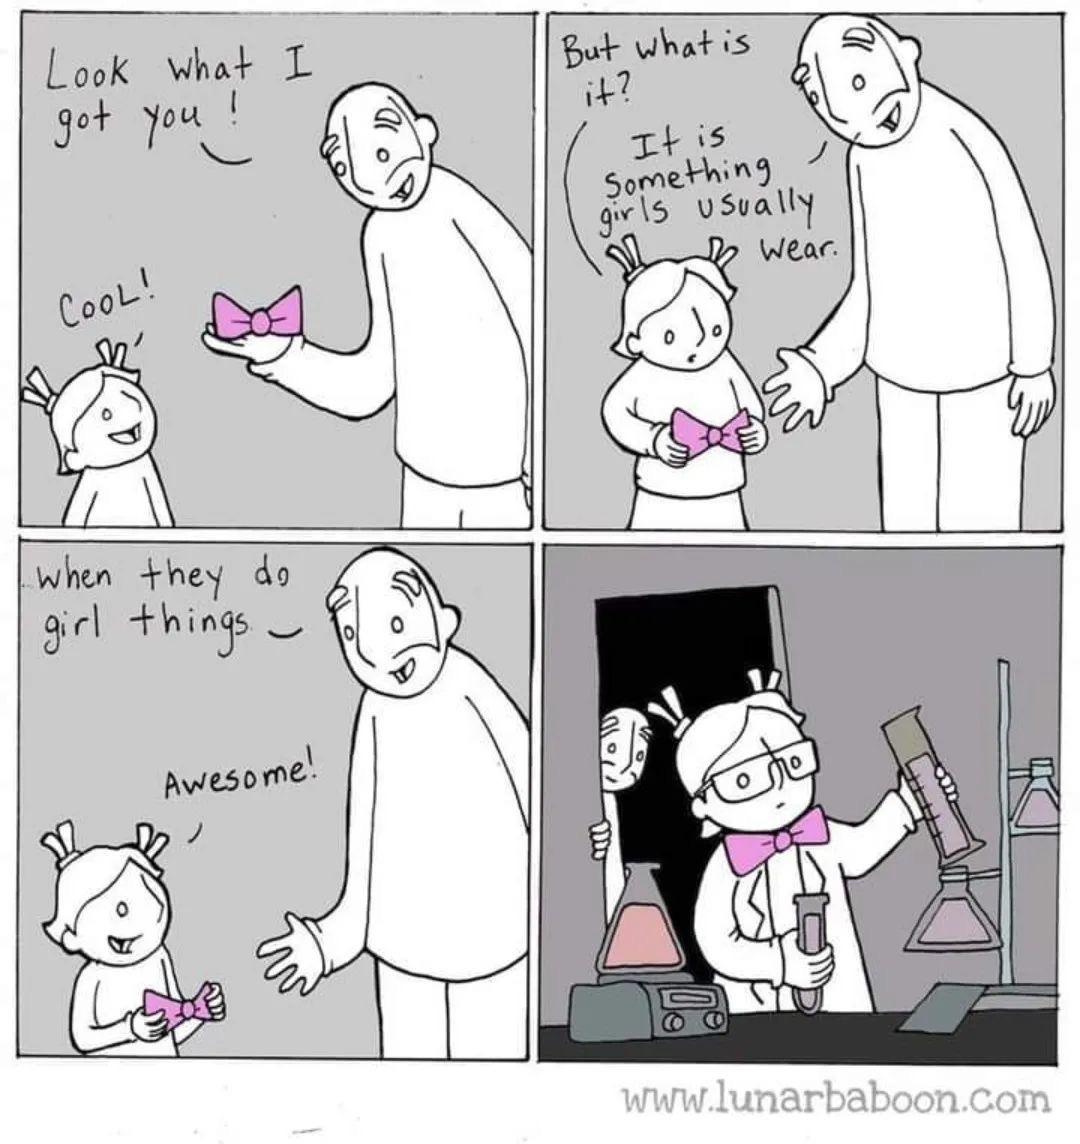 Photo by Samantha Townsend on November 27, 2023. May be an image of diaper and text that says 'Look what I got you! But whatis it? Itis Something usually girls wear. COOL! when they da girl things Awesome! www.lunarbaboon.com'.